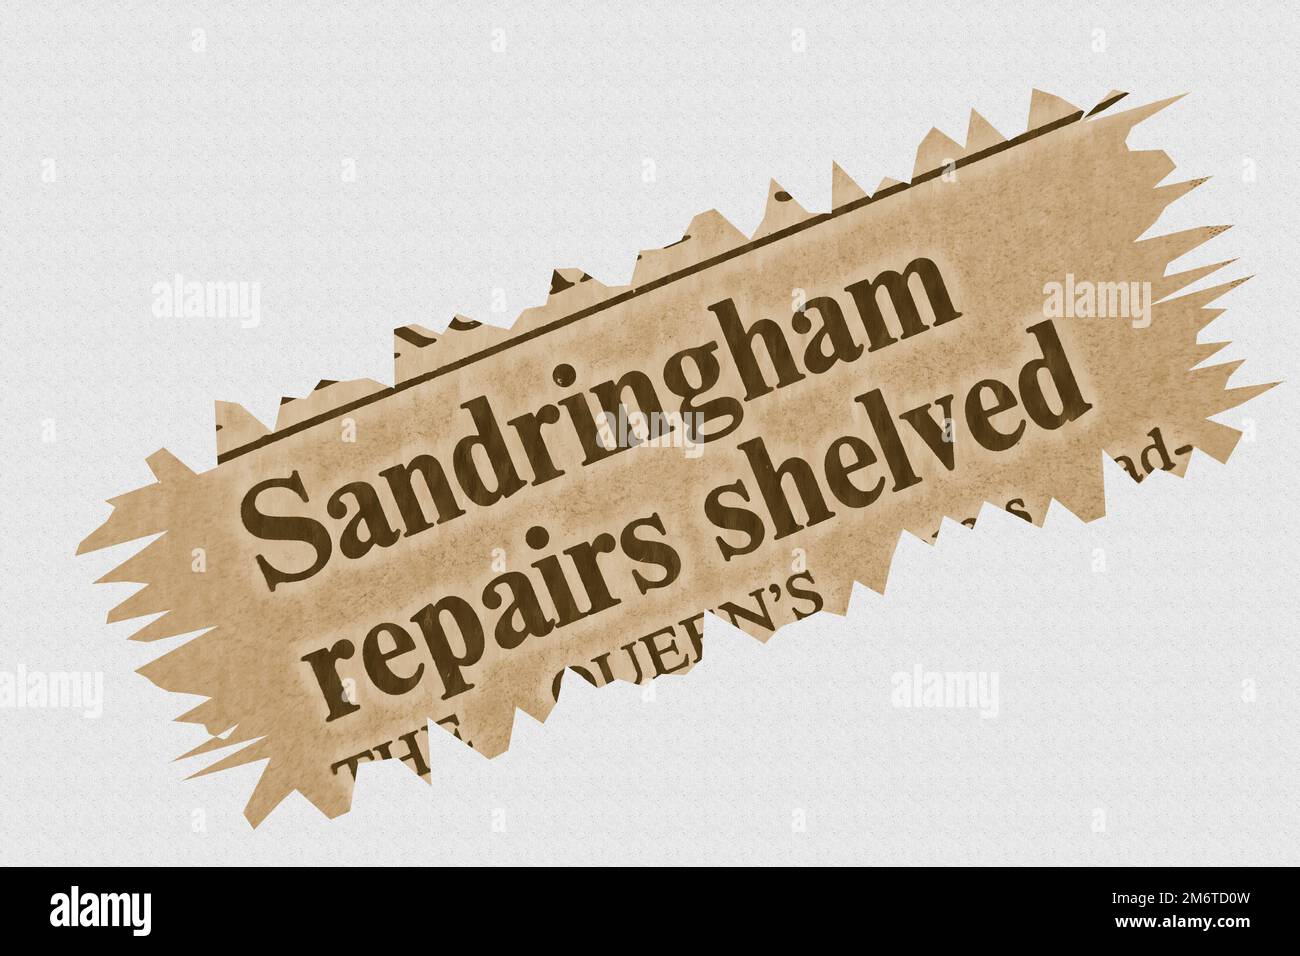 Sandringham repairs shelved - news story from 1975 newspaper headline article title with overlay highlight Stock Photo